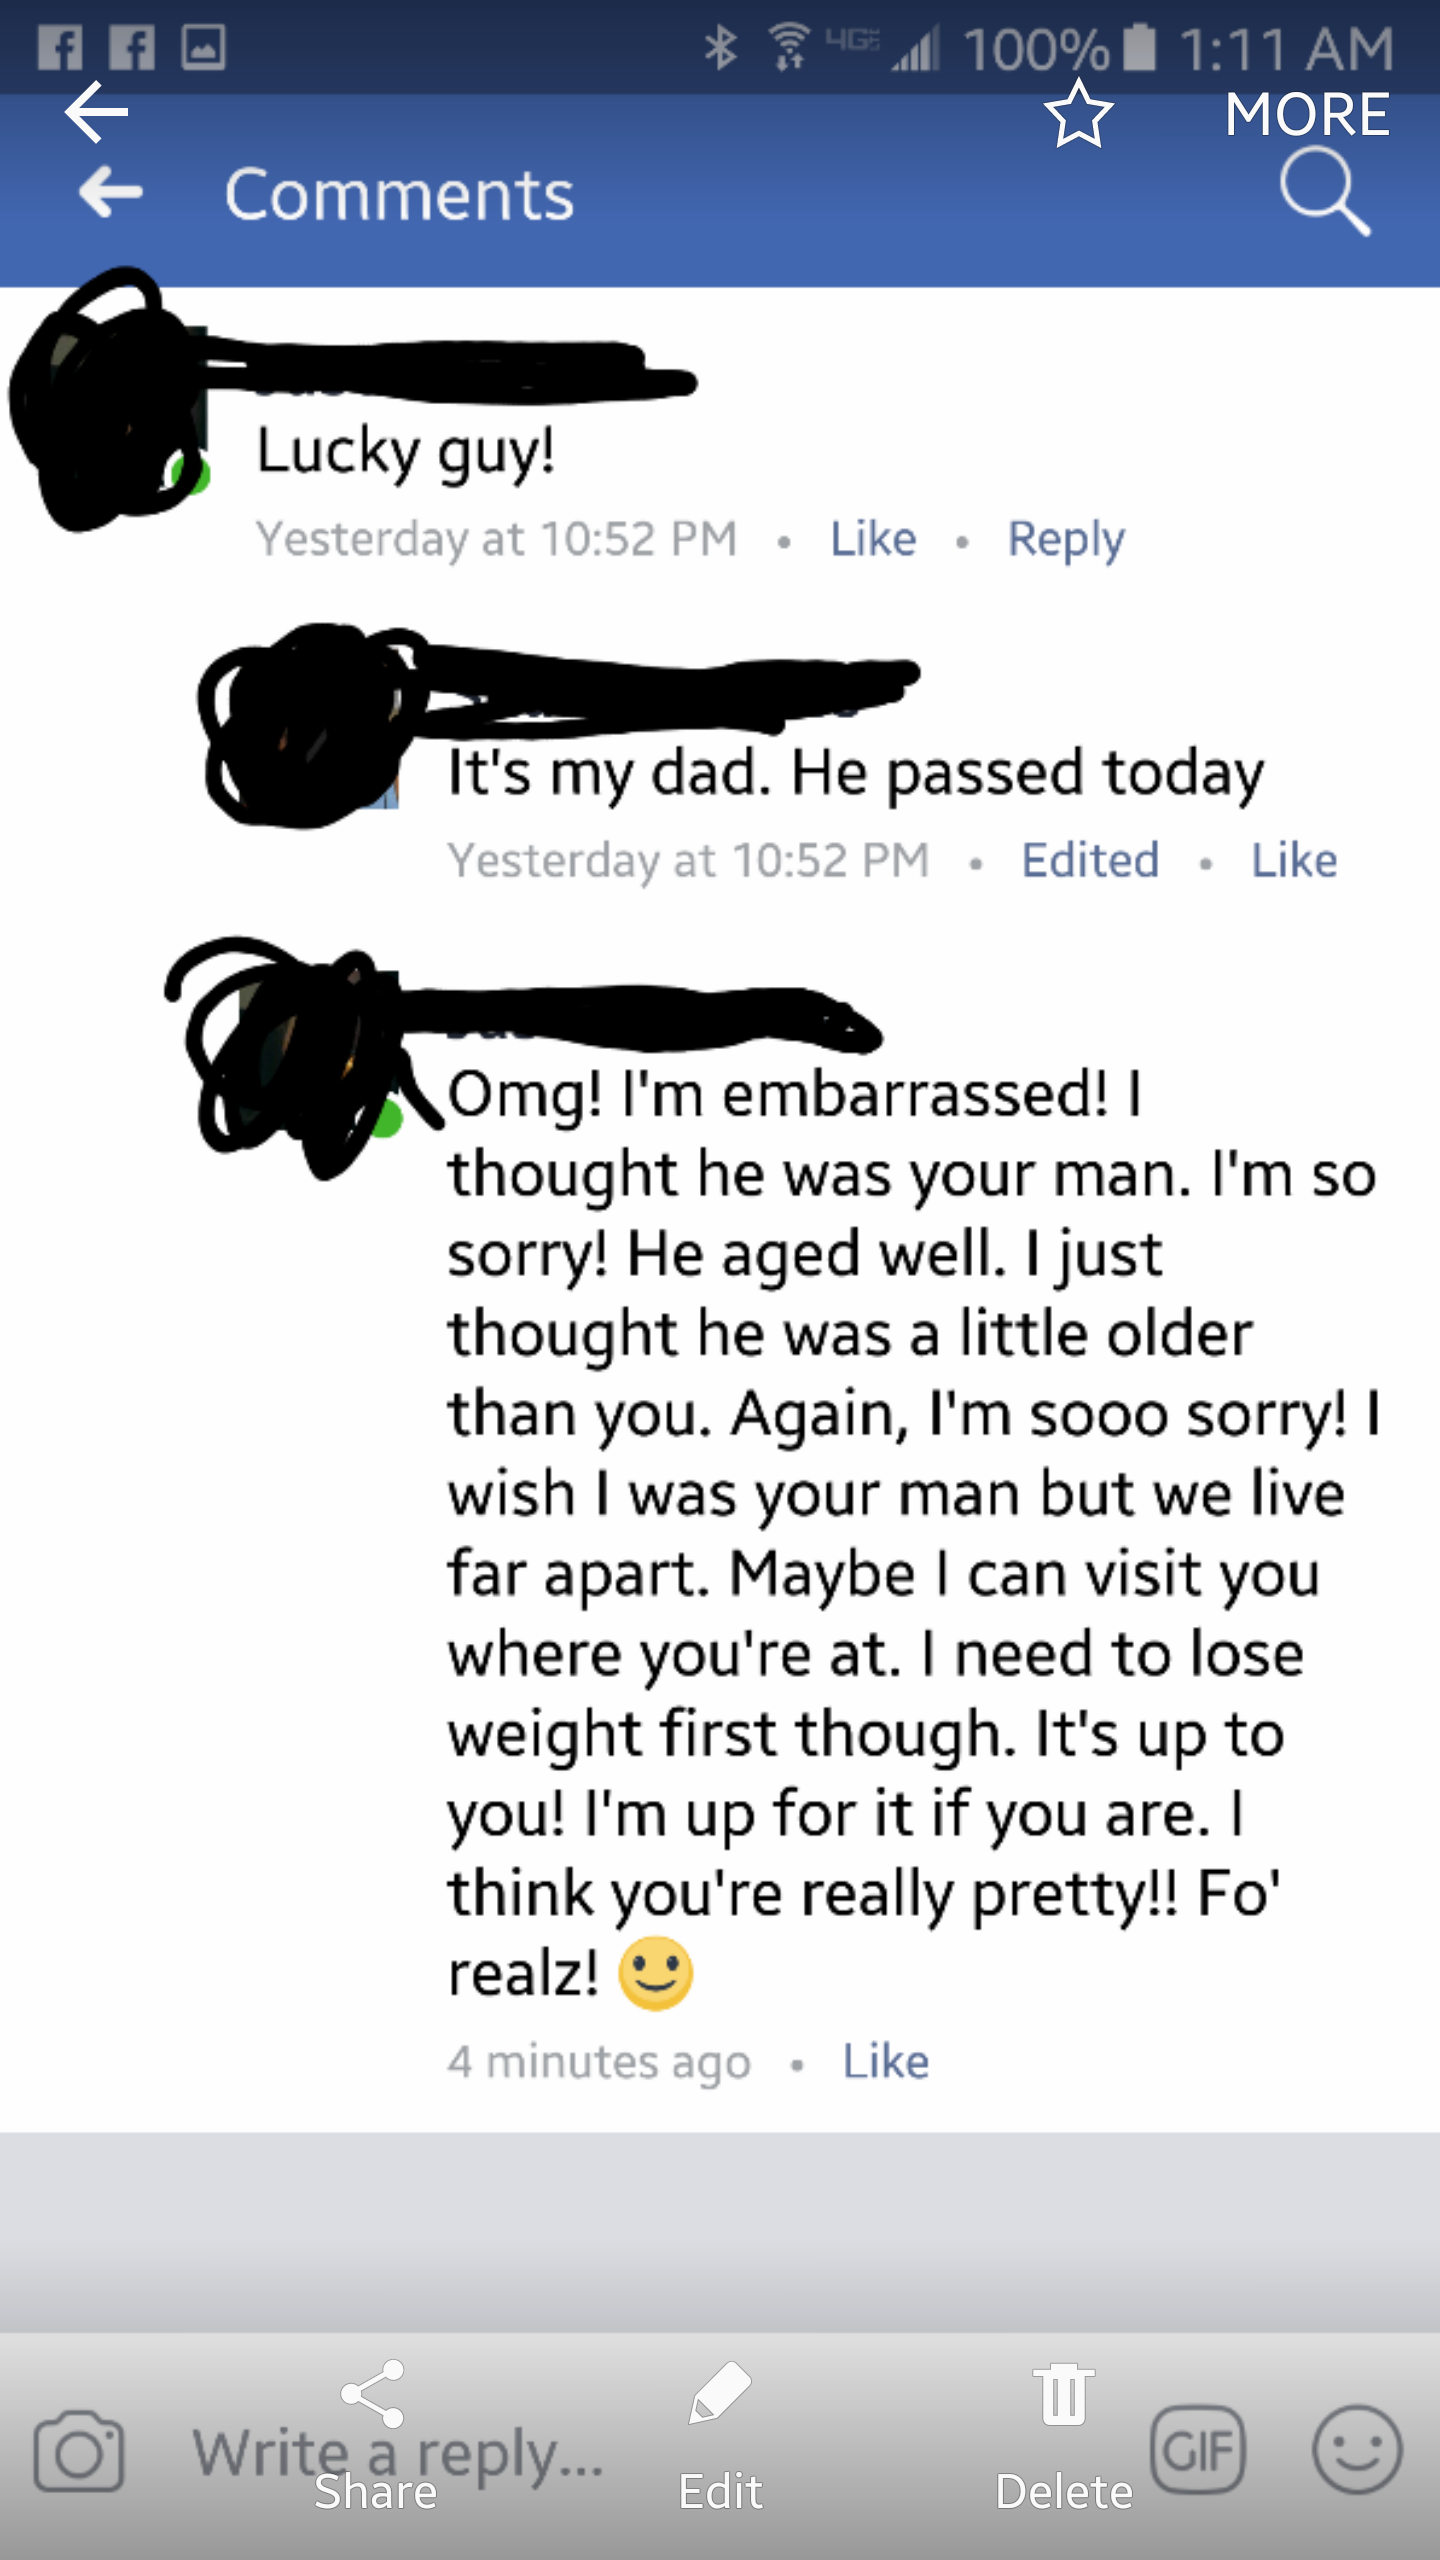 sad cringe - Be 100% 8 More Lucky guy! Yesterday at It's my dad. He passed today Yesterday at Edited. Omg! I'm embarrassed!! thought he was your man. I'm so sorry! He aged well. I just thought he was a little older than you. Again, I'm sooo sorry!! wish I